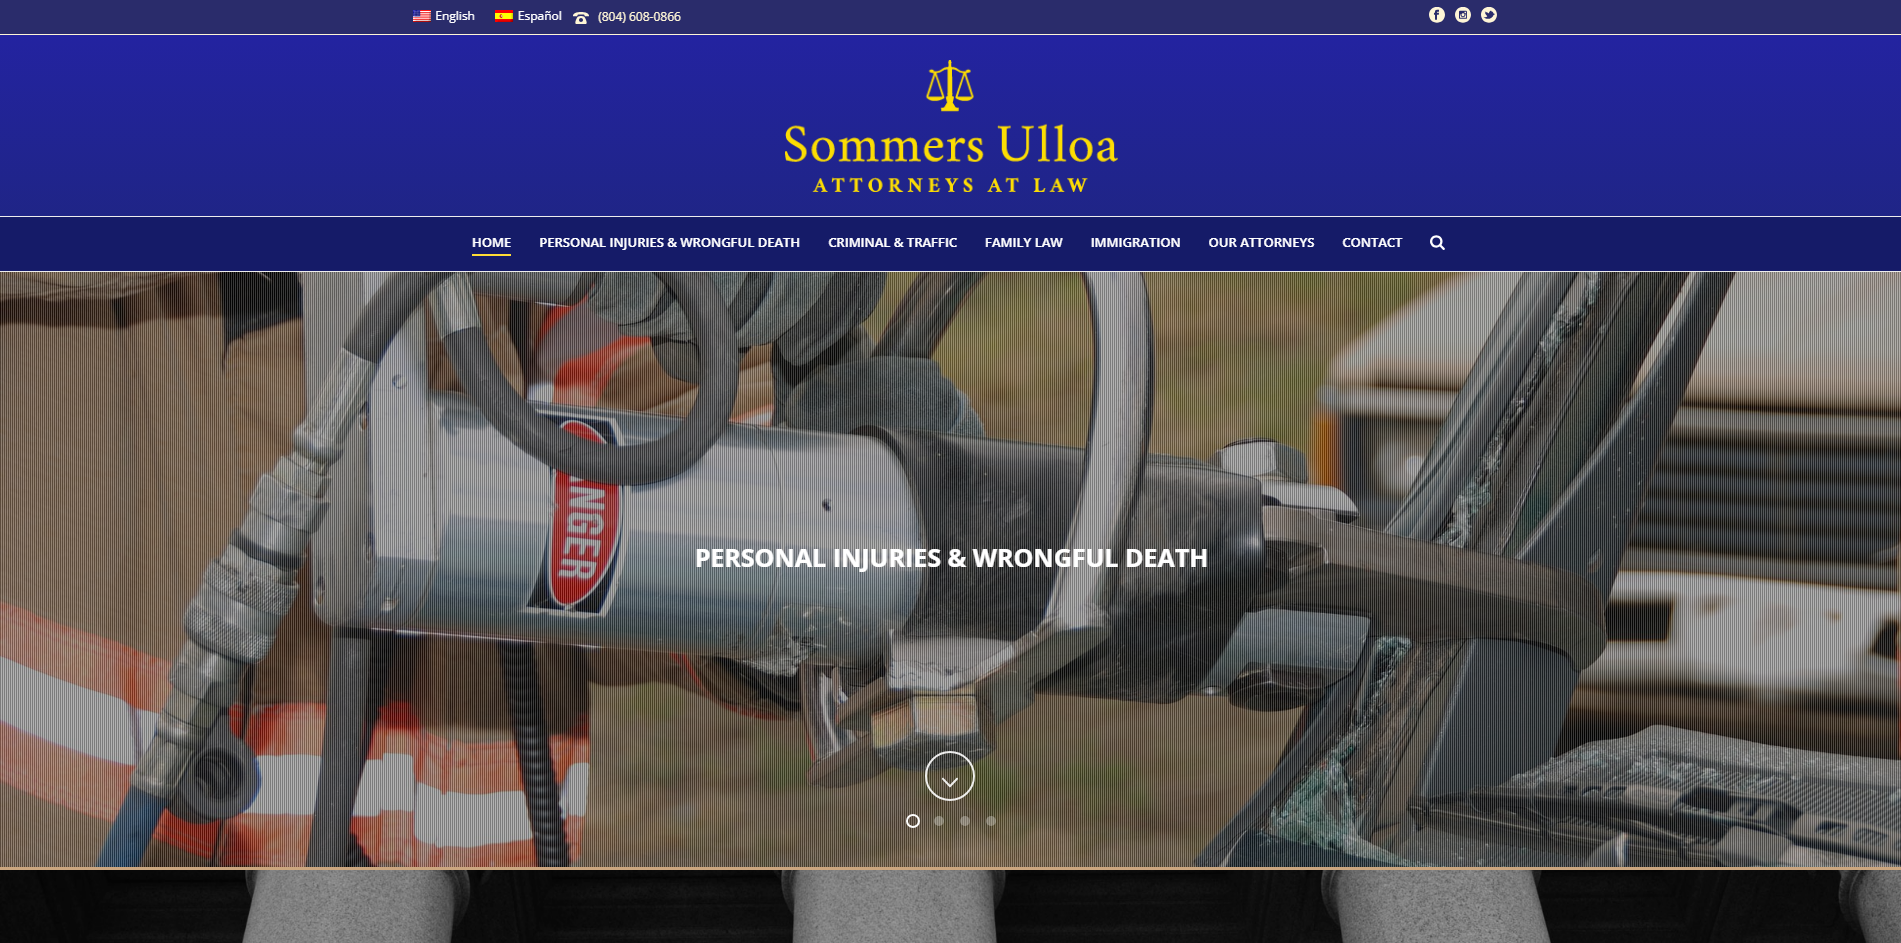 Sommers Ulloa Attorneys at Law